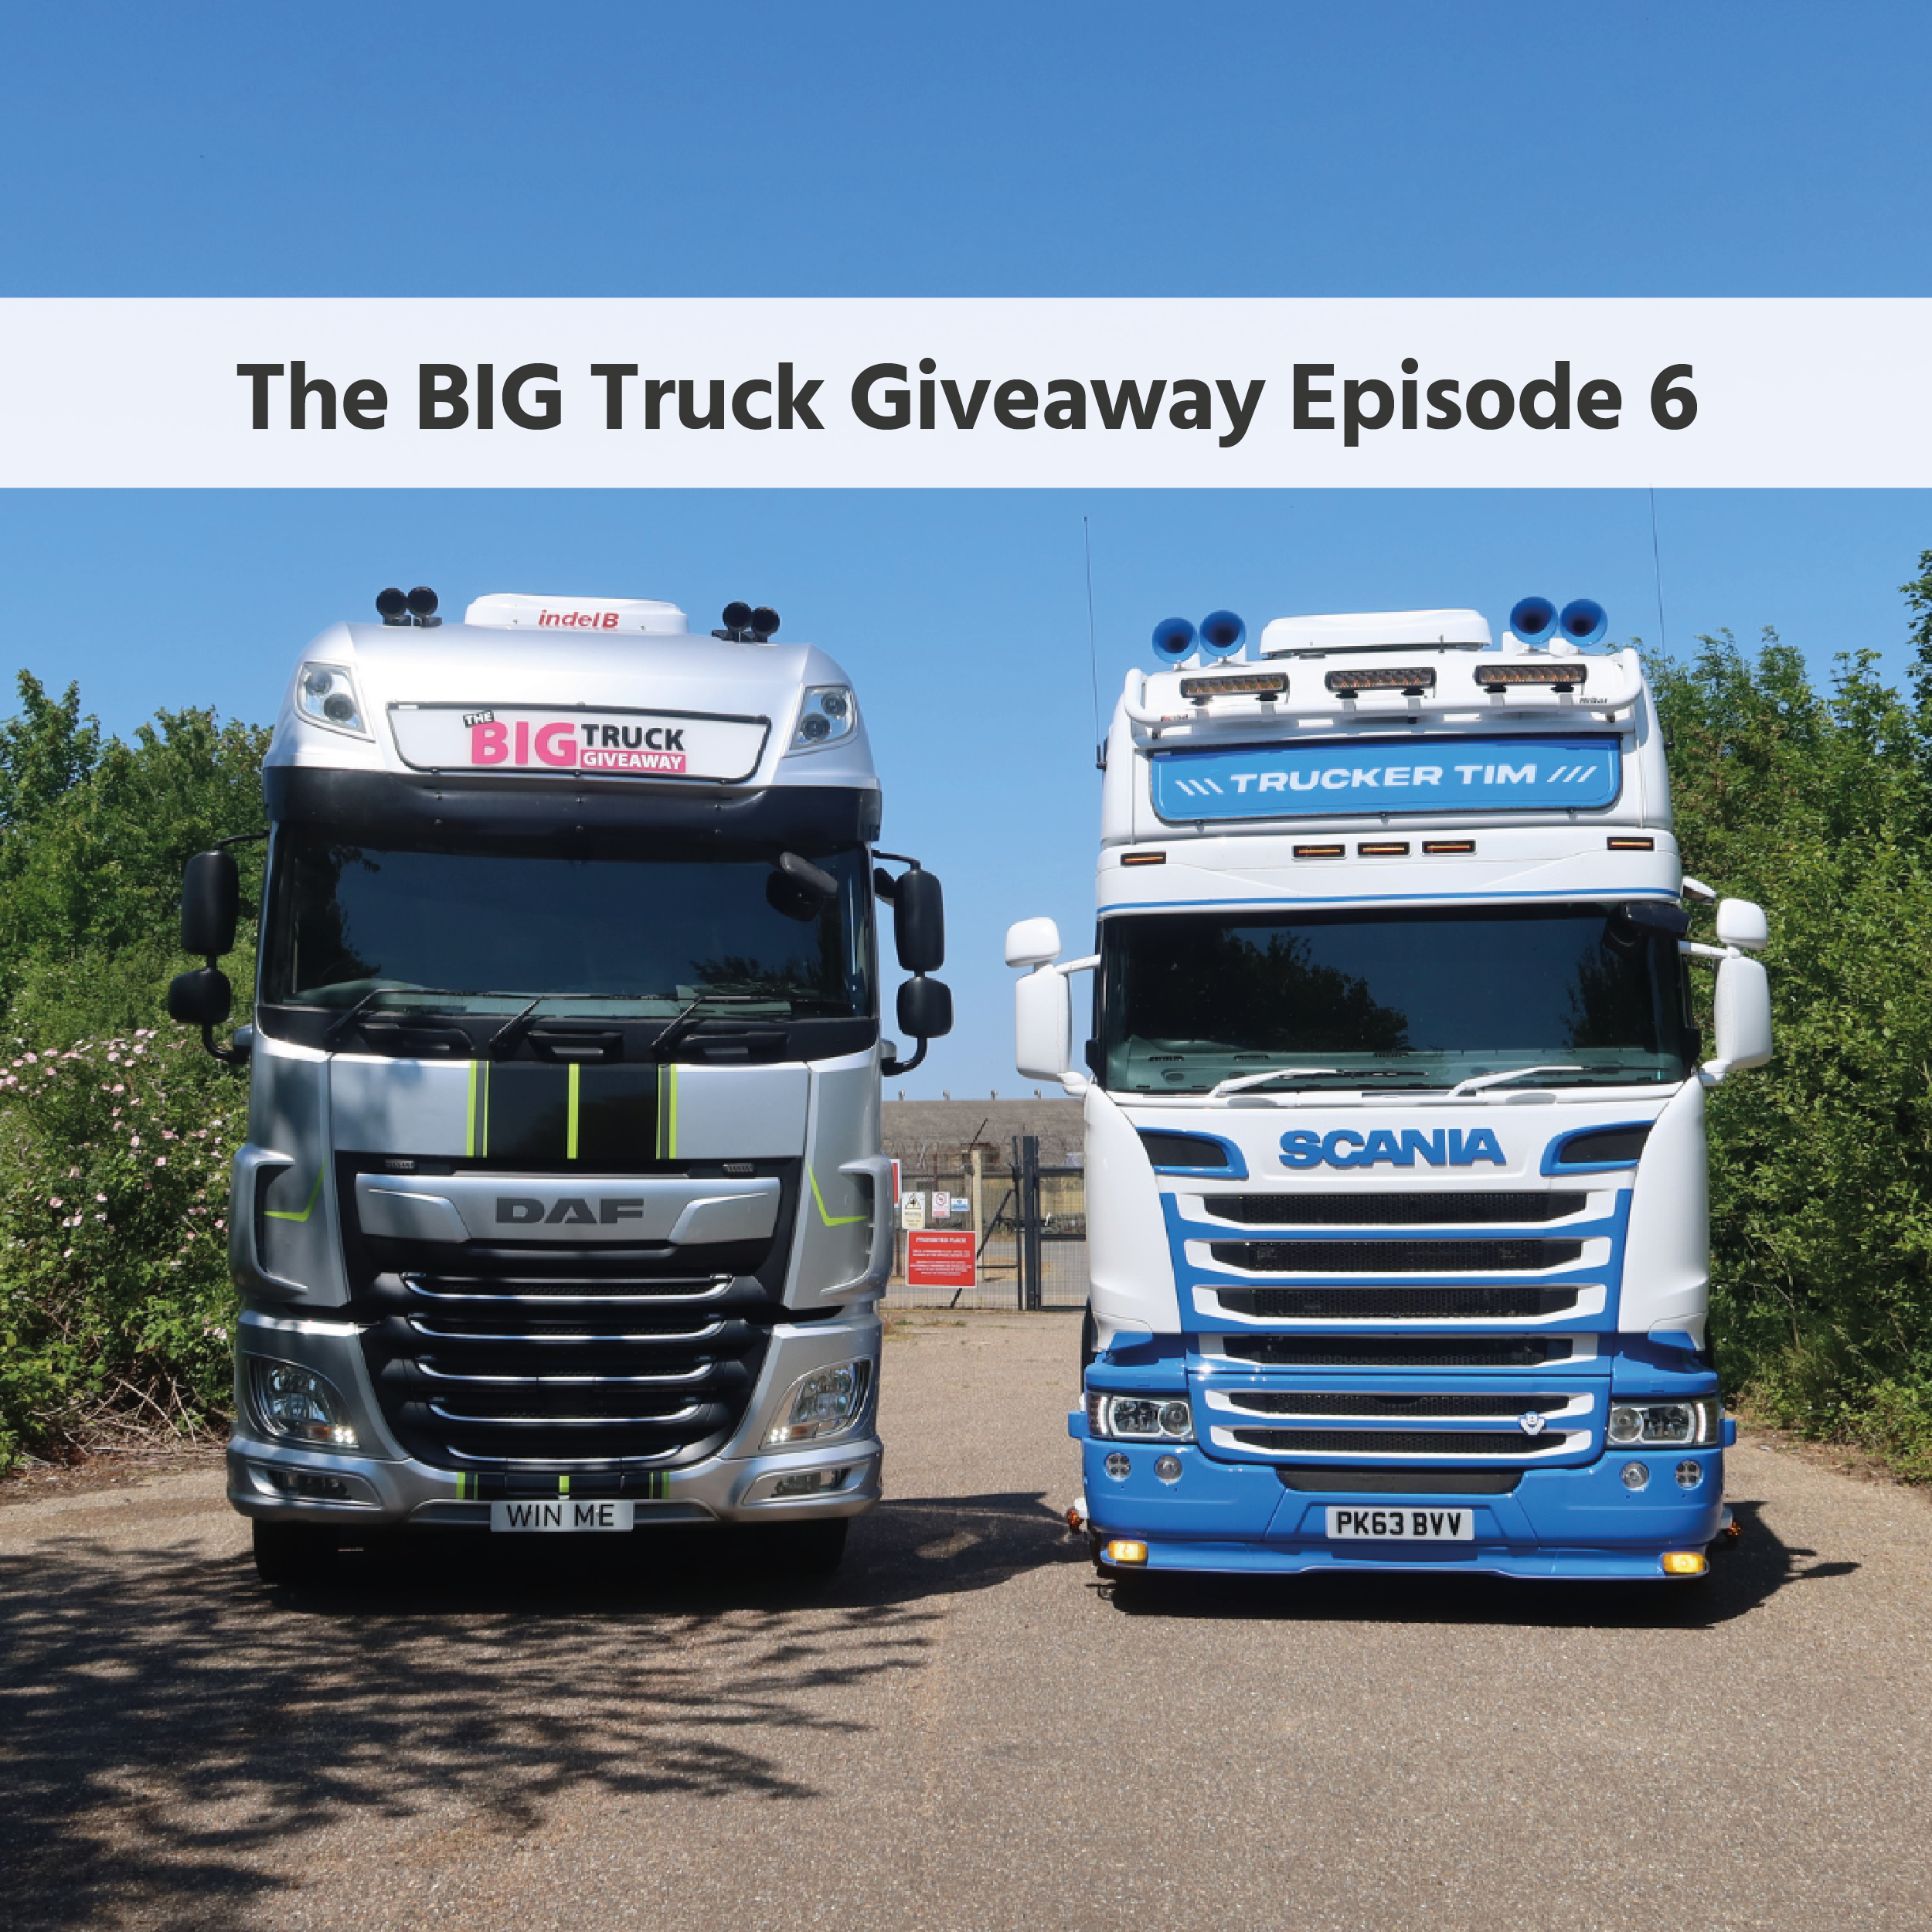 Trucker Tim CRASHED Our Truck?! | The BIG Truck Giveaway Episode 6